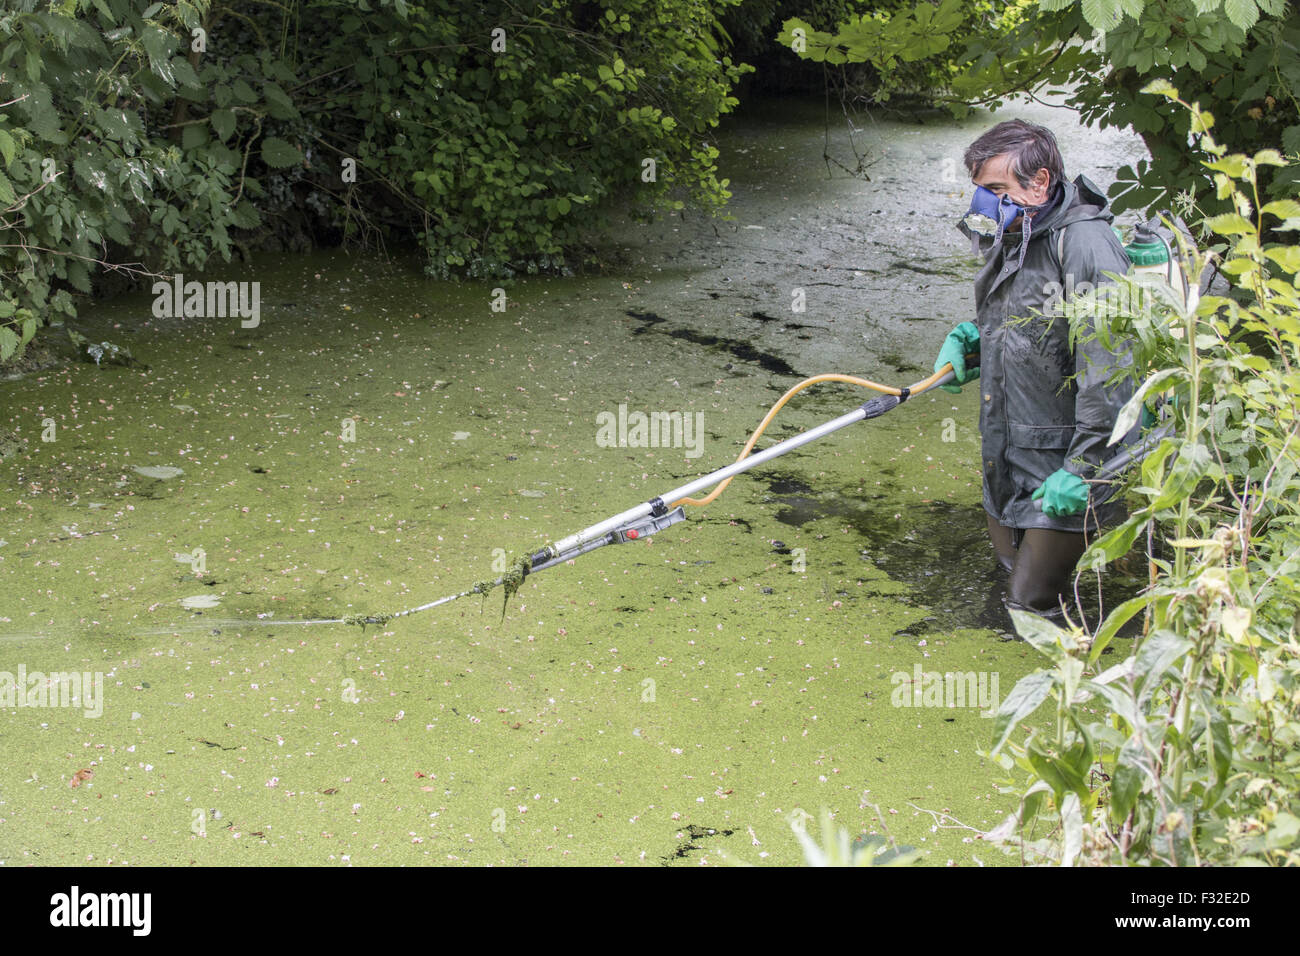 Spraying with chemical weed killer to clear Duckweed which is a rapidly spreading aquatic plant that deprives ponds of oxygen. Stock Photo